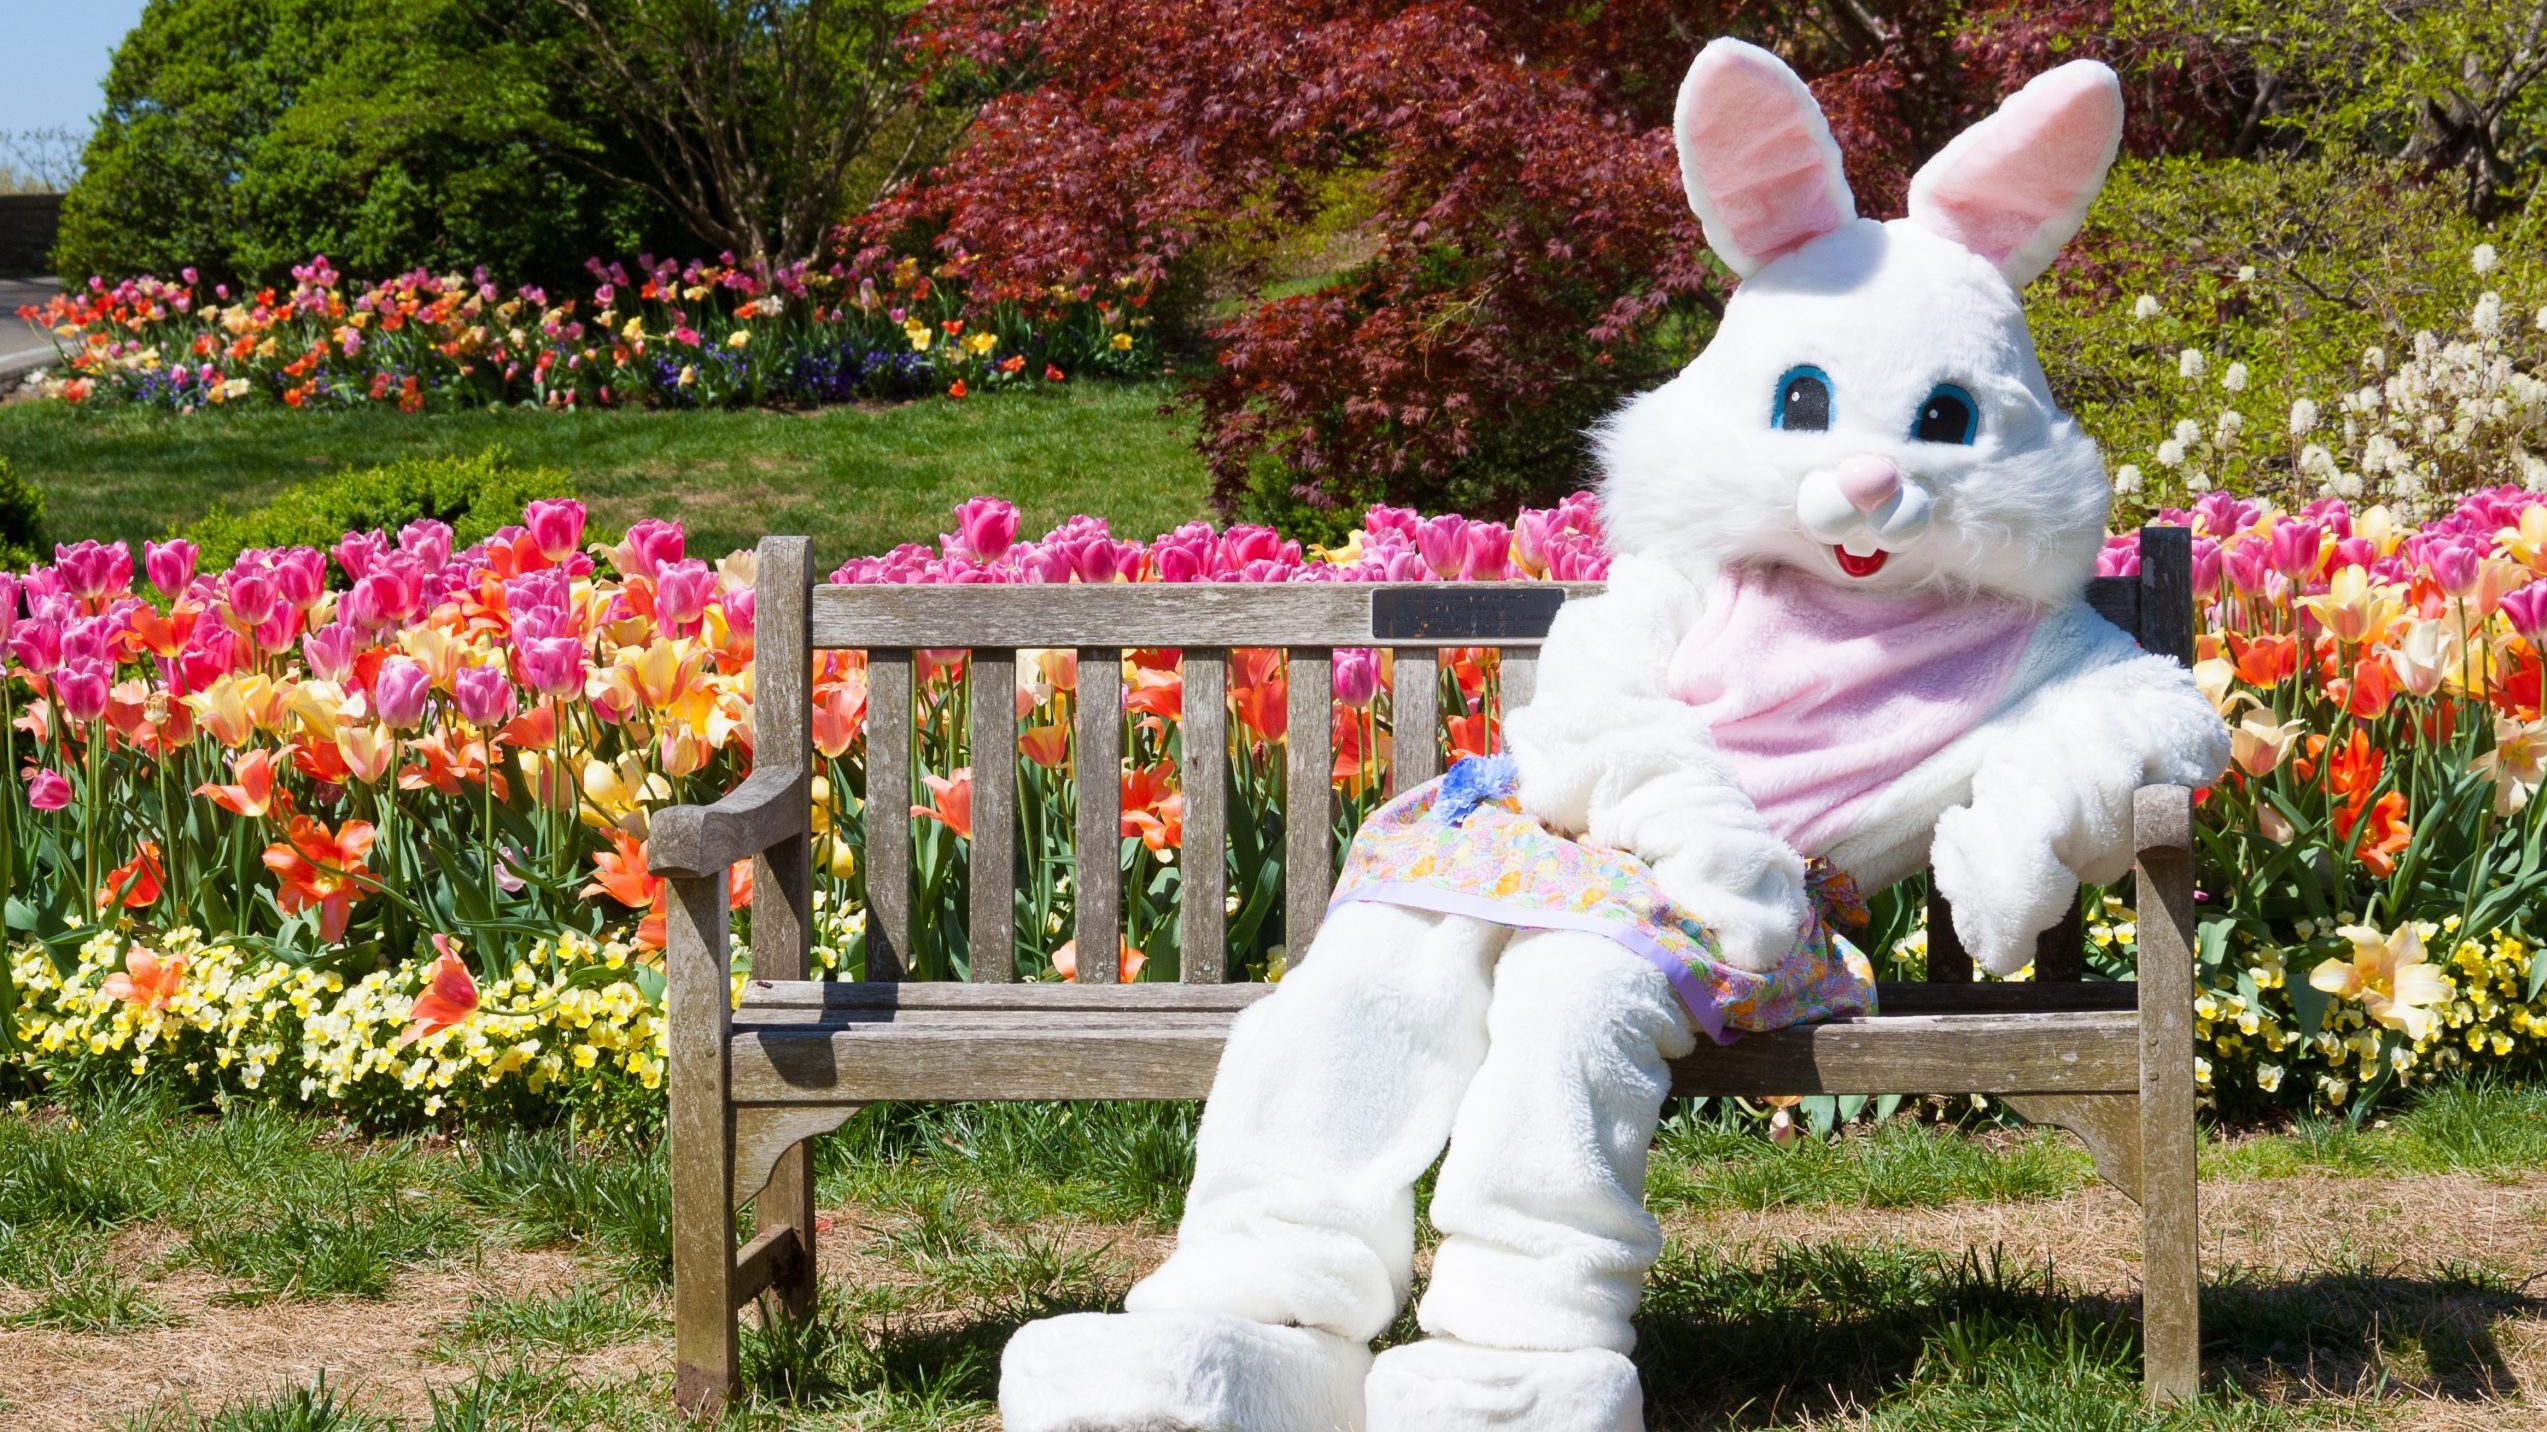 You can get a free Easter Bunny photo this spring at these two stores